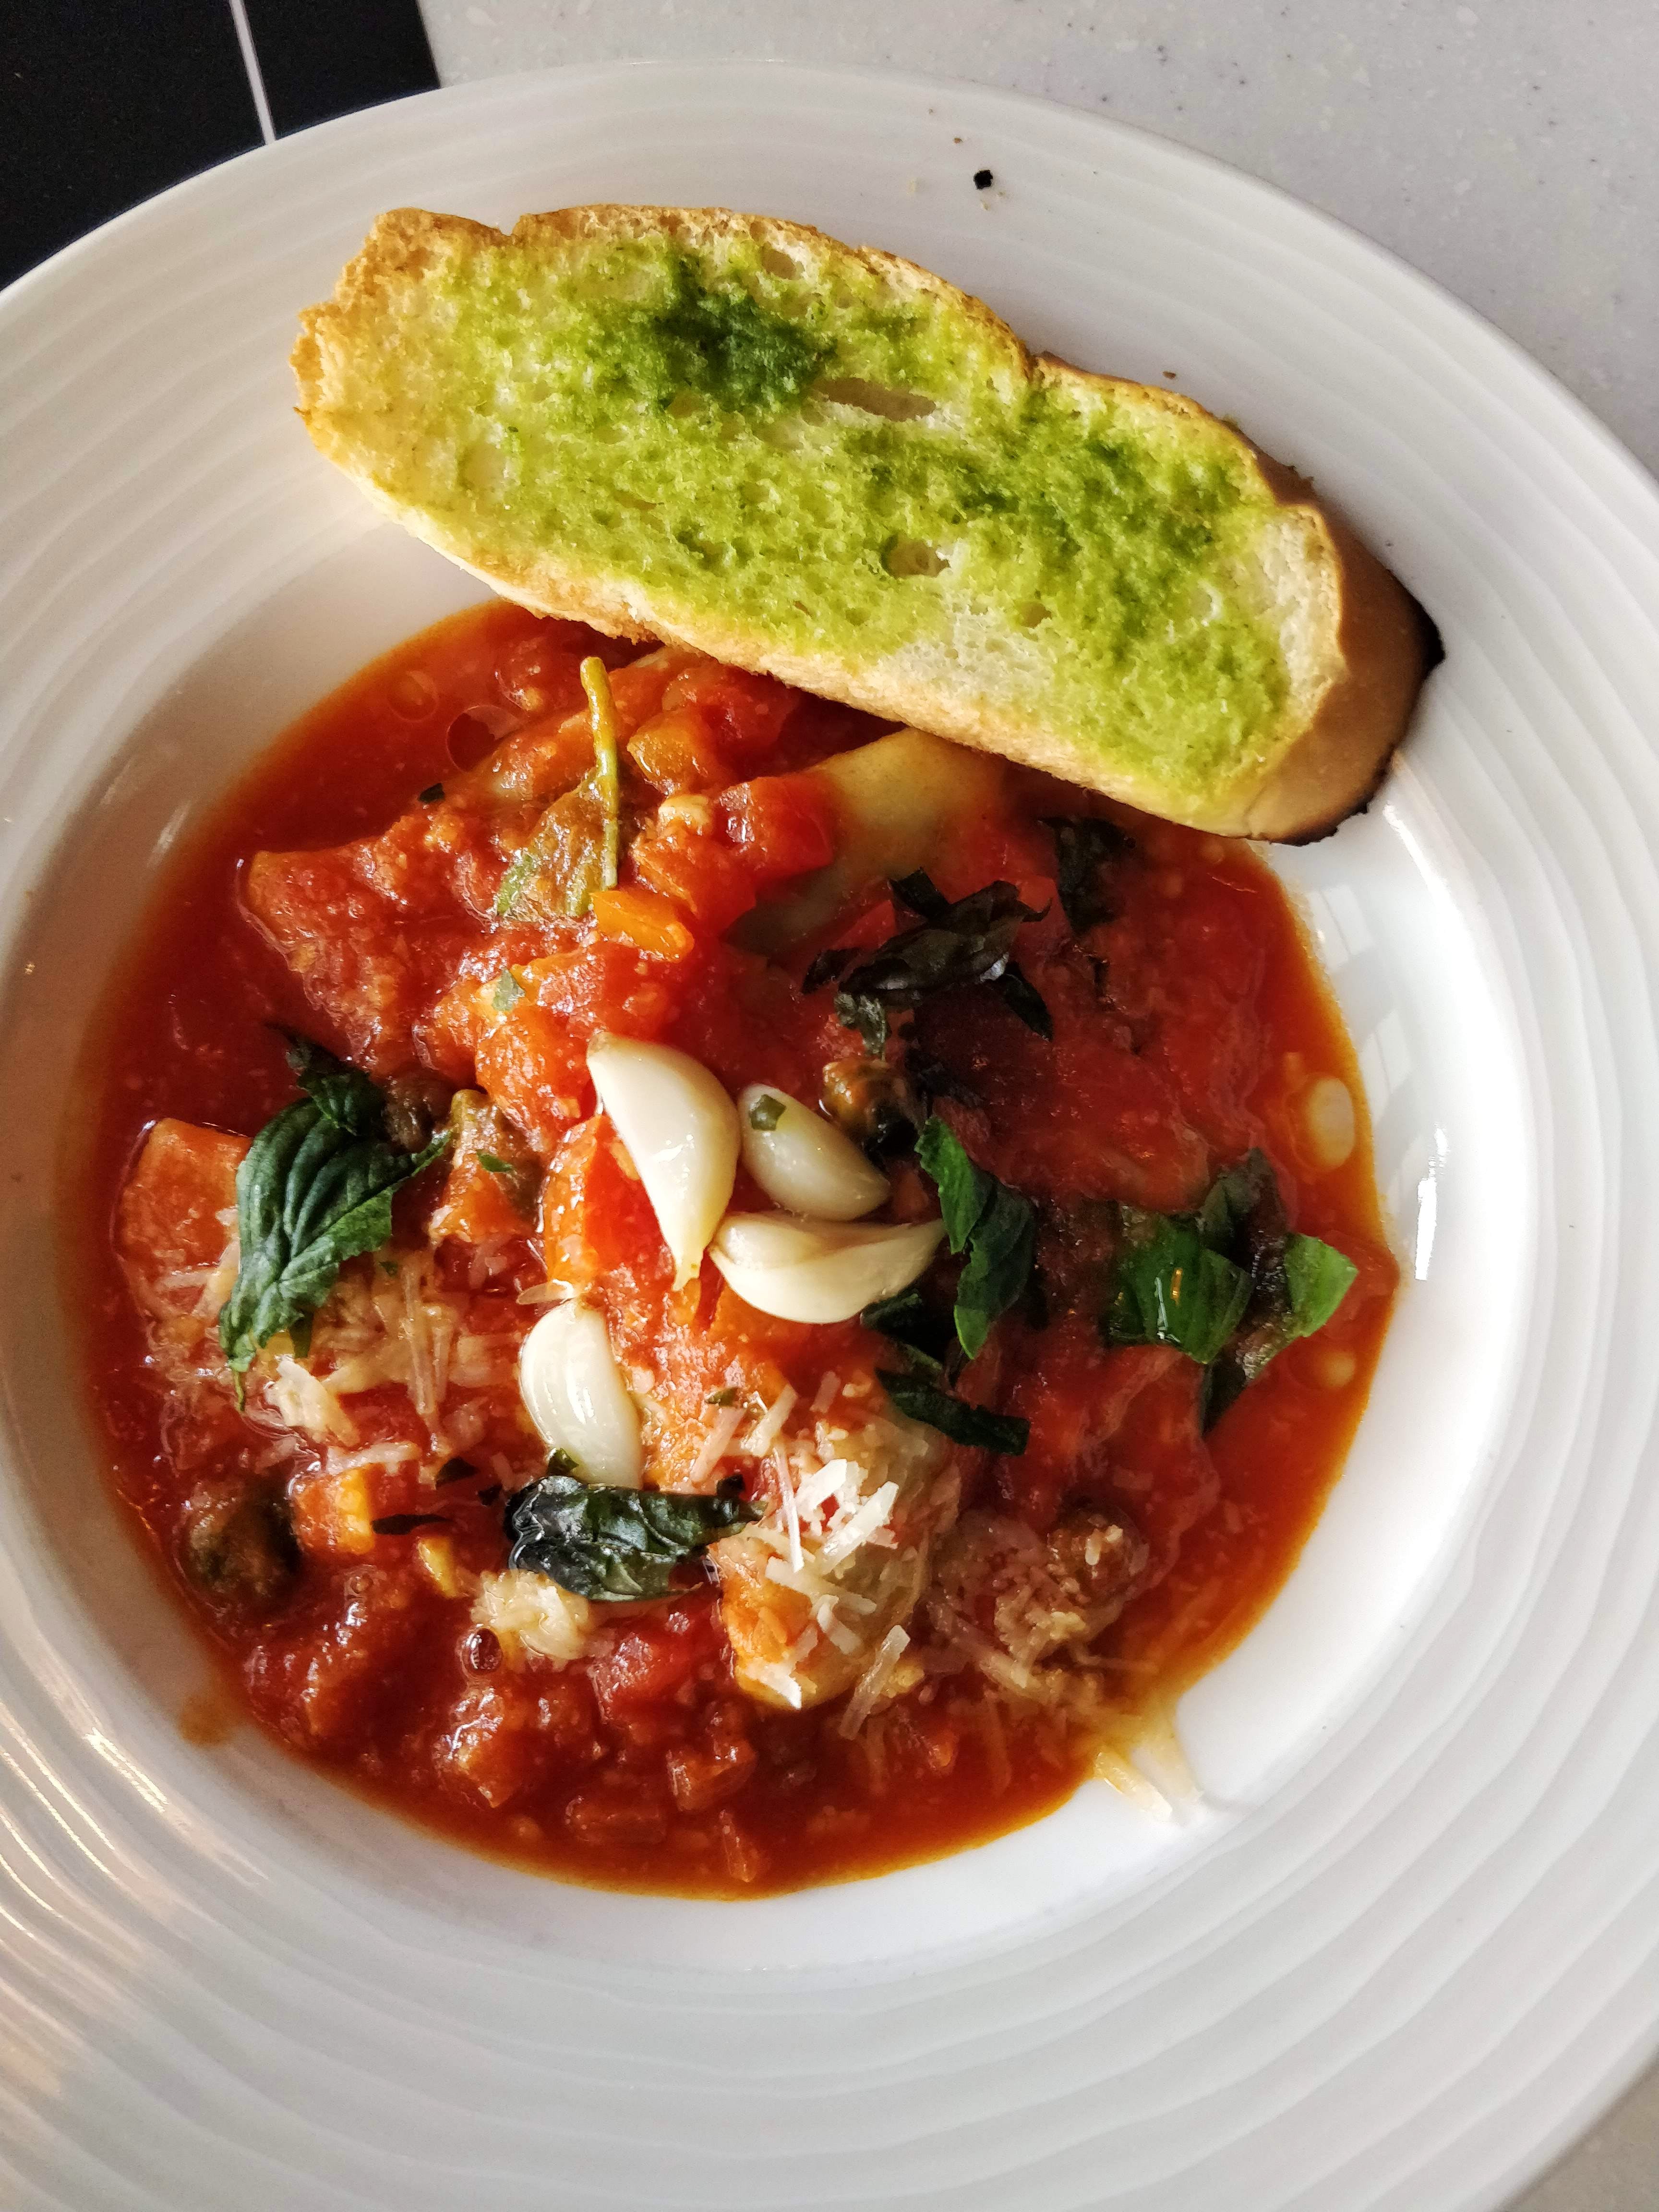 Dish,Food,Cuisine,Ingredient,Produce,Stewed tomatoes,Recipe,Minestrone,Gazpacho,Soup